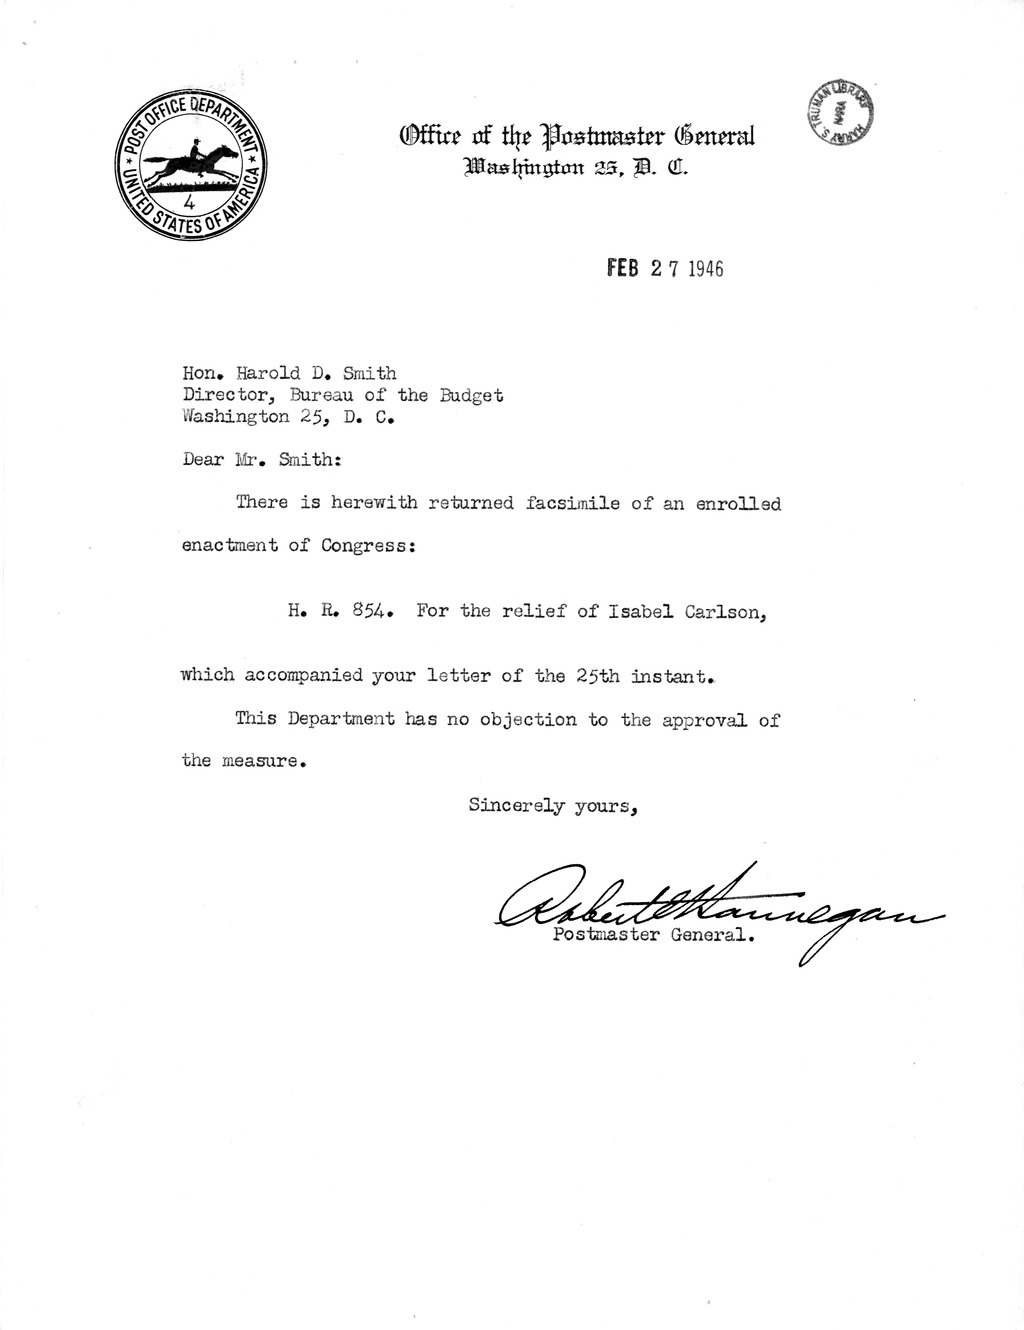 Memorandum from Harold D. Smith to M. C. Latta, H. R. 854, For the Relief of Isabel Carlson, with Attachments